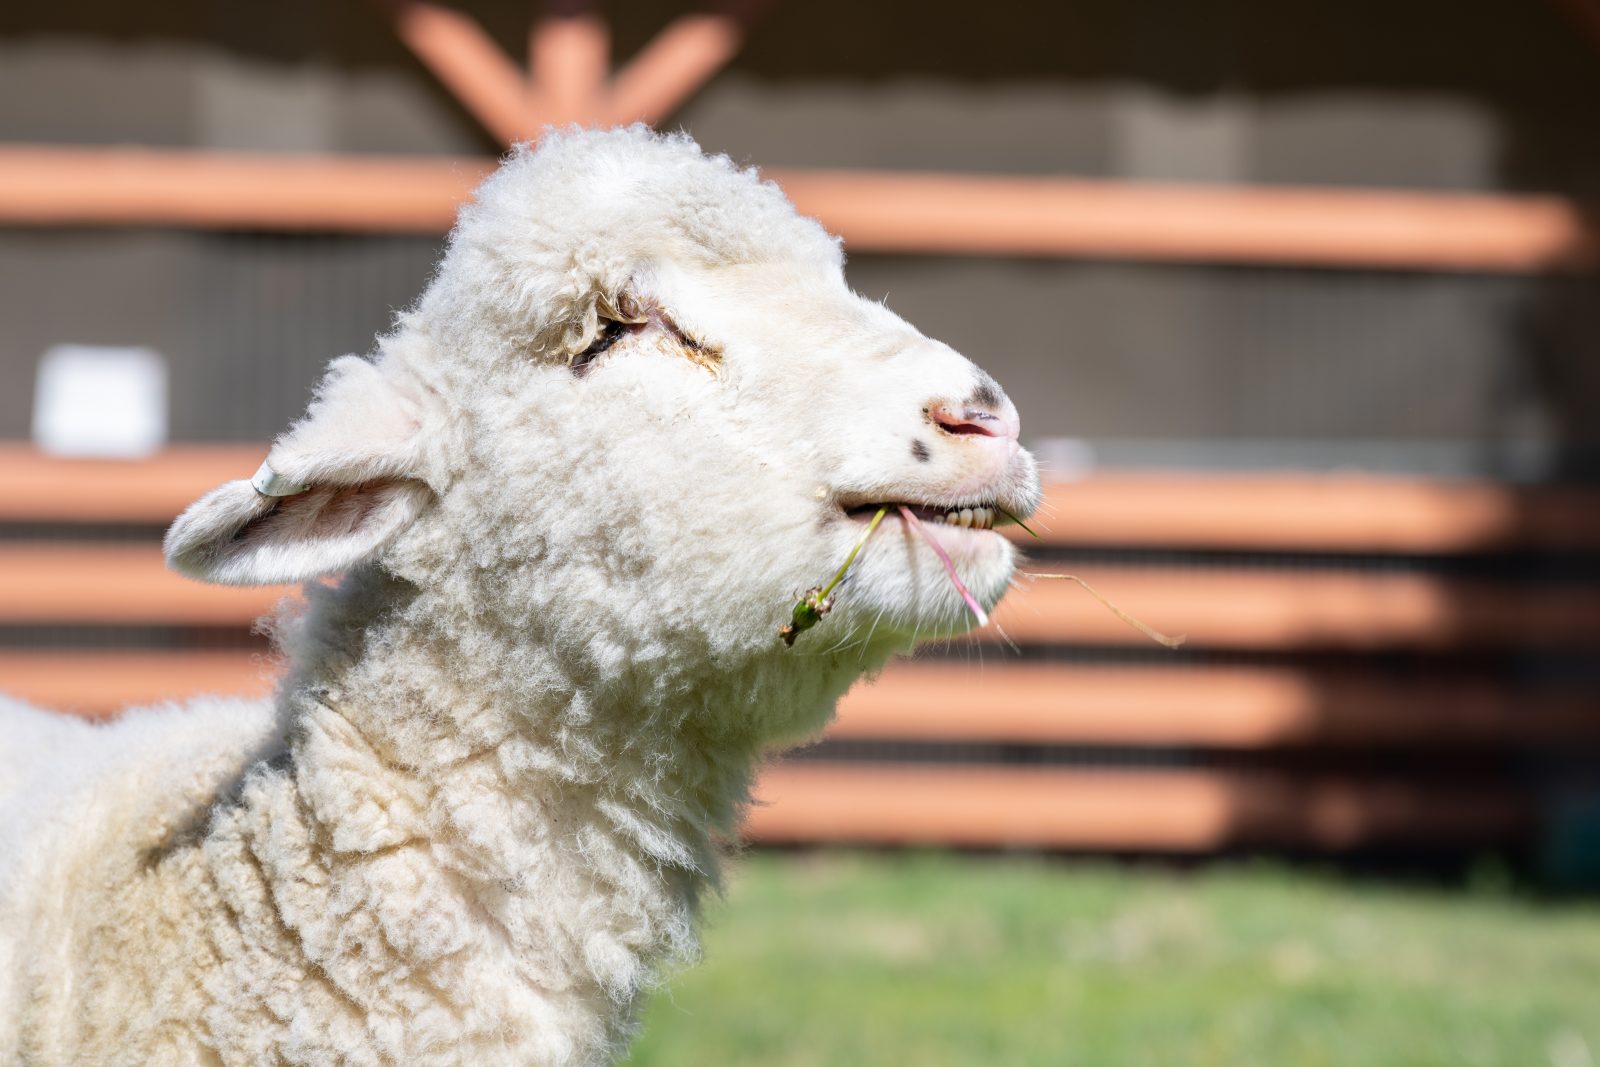 Biscuit, a blind sheep, at Farm Sanctuary